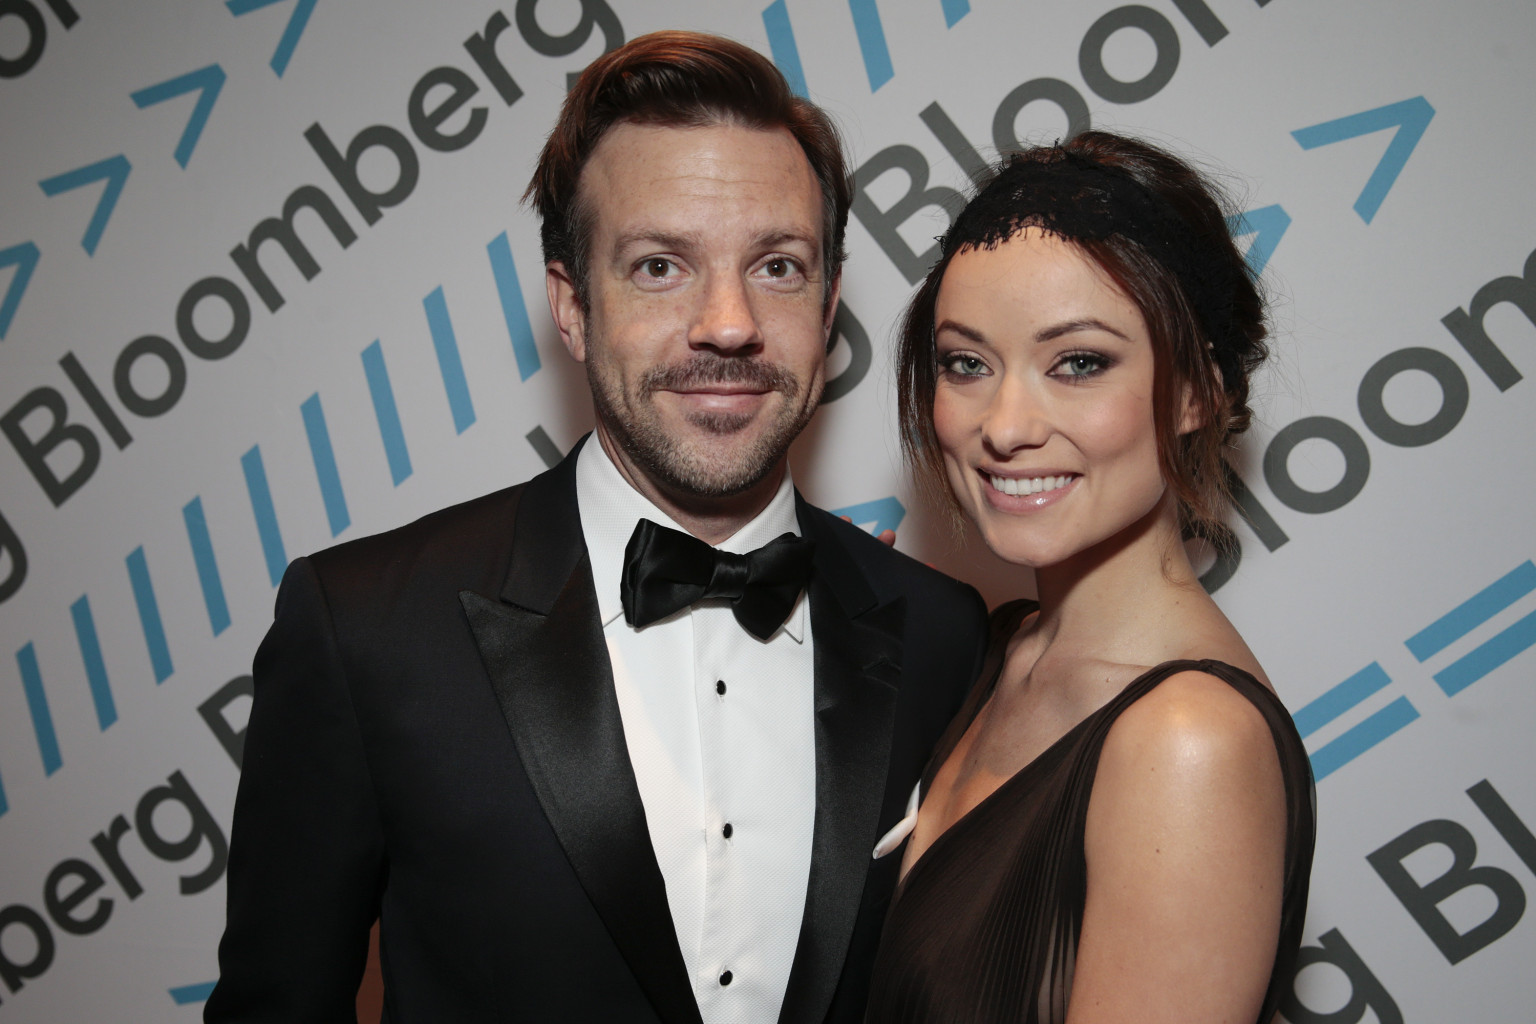 Actress Olivia Wilde and actor Jason Sudeikis attend the Bloomberg cocktail party before the White House Correspondents' Association (WHCA) dinner in Washington, D.C., U.S., on Saturday, April 27, 2013. The 99th annual dinner raises money for WHCA scholarships and honors the recipients of the organization's journalism awards. Photographer: Andrew Harrer/Bloomberg via Getty Images